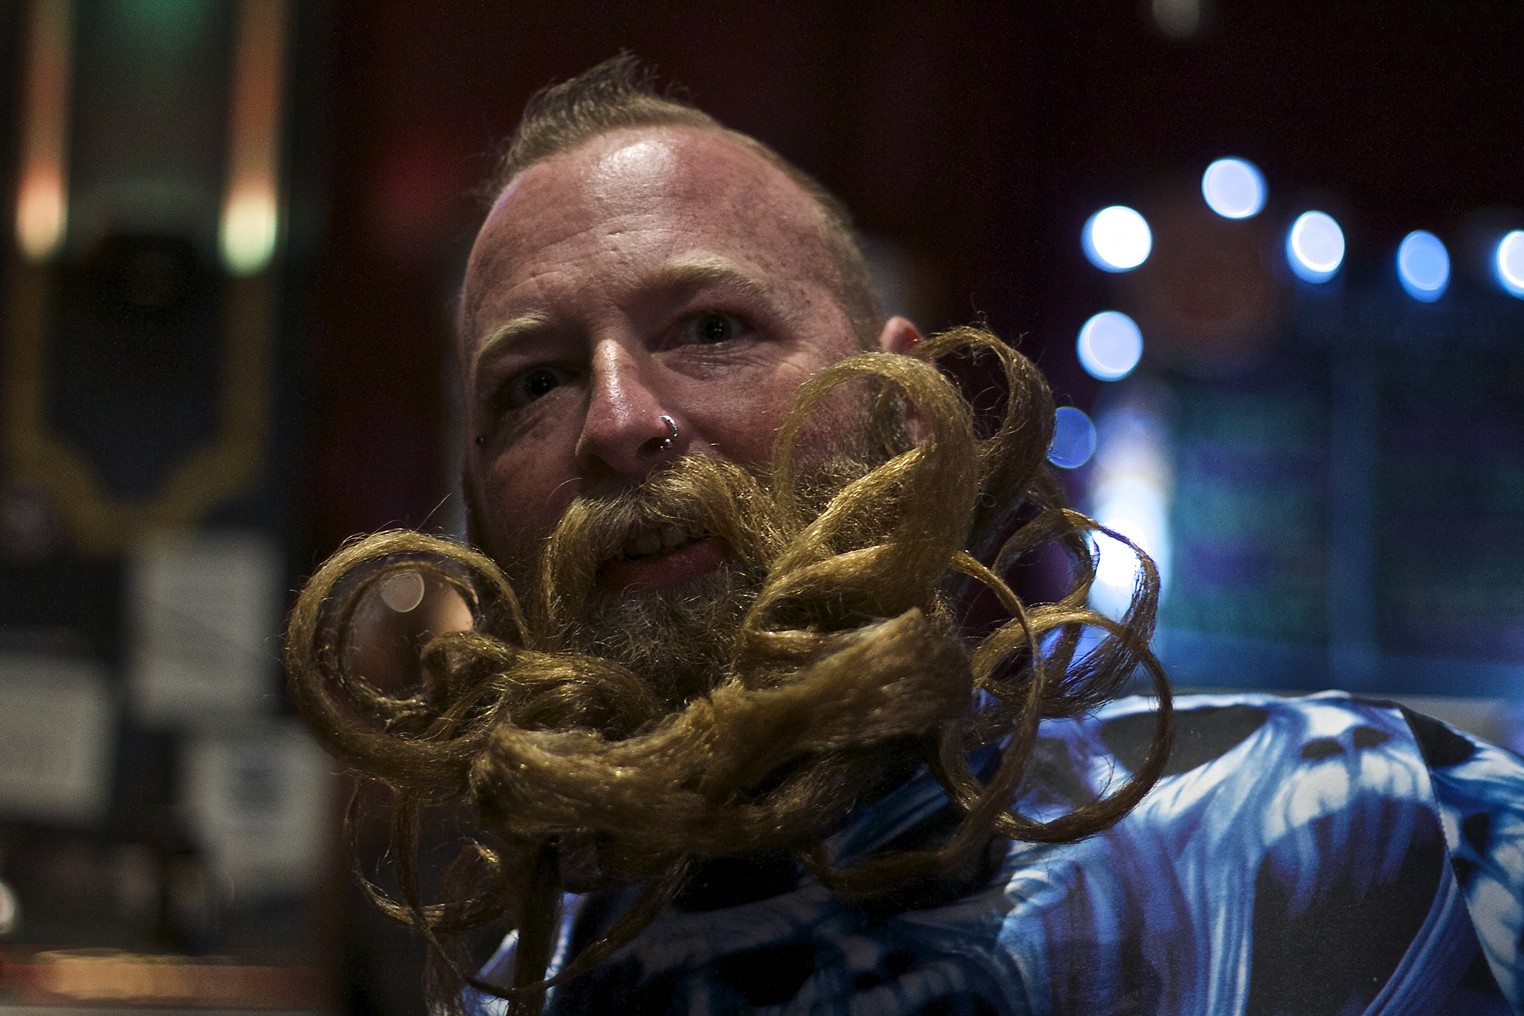 A Hair-Raising Contest at the Beard and Moustache Competition | Denver |  Denver Westword | The Leading Independent News Source in Denver, Colorado